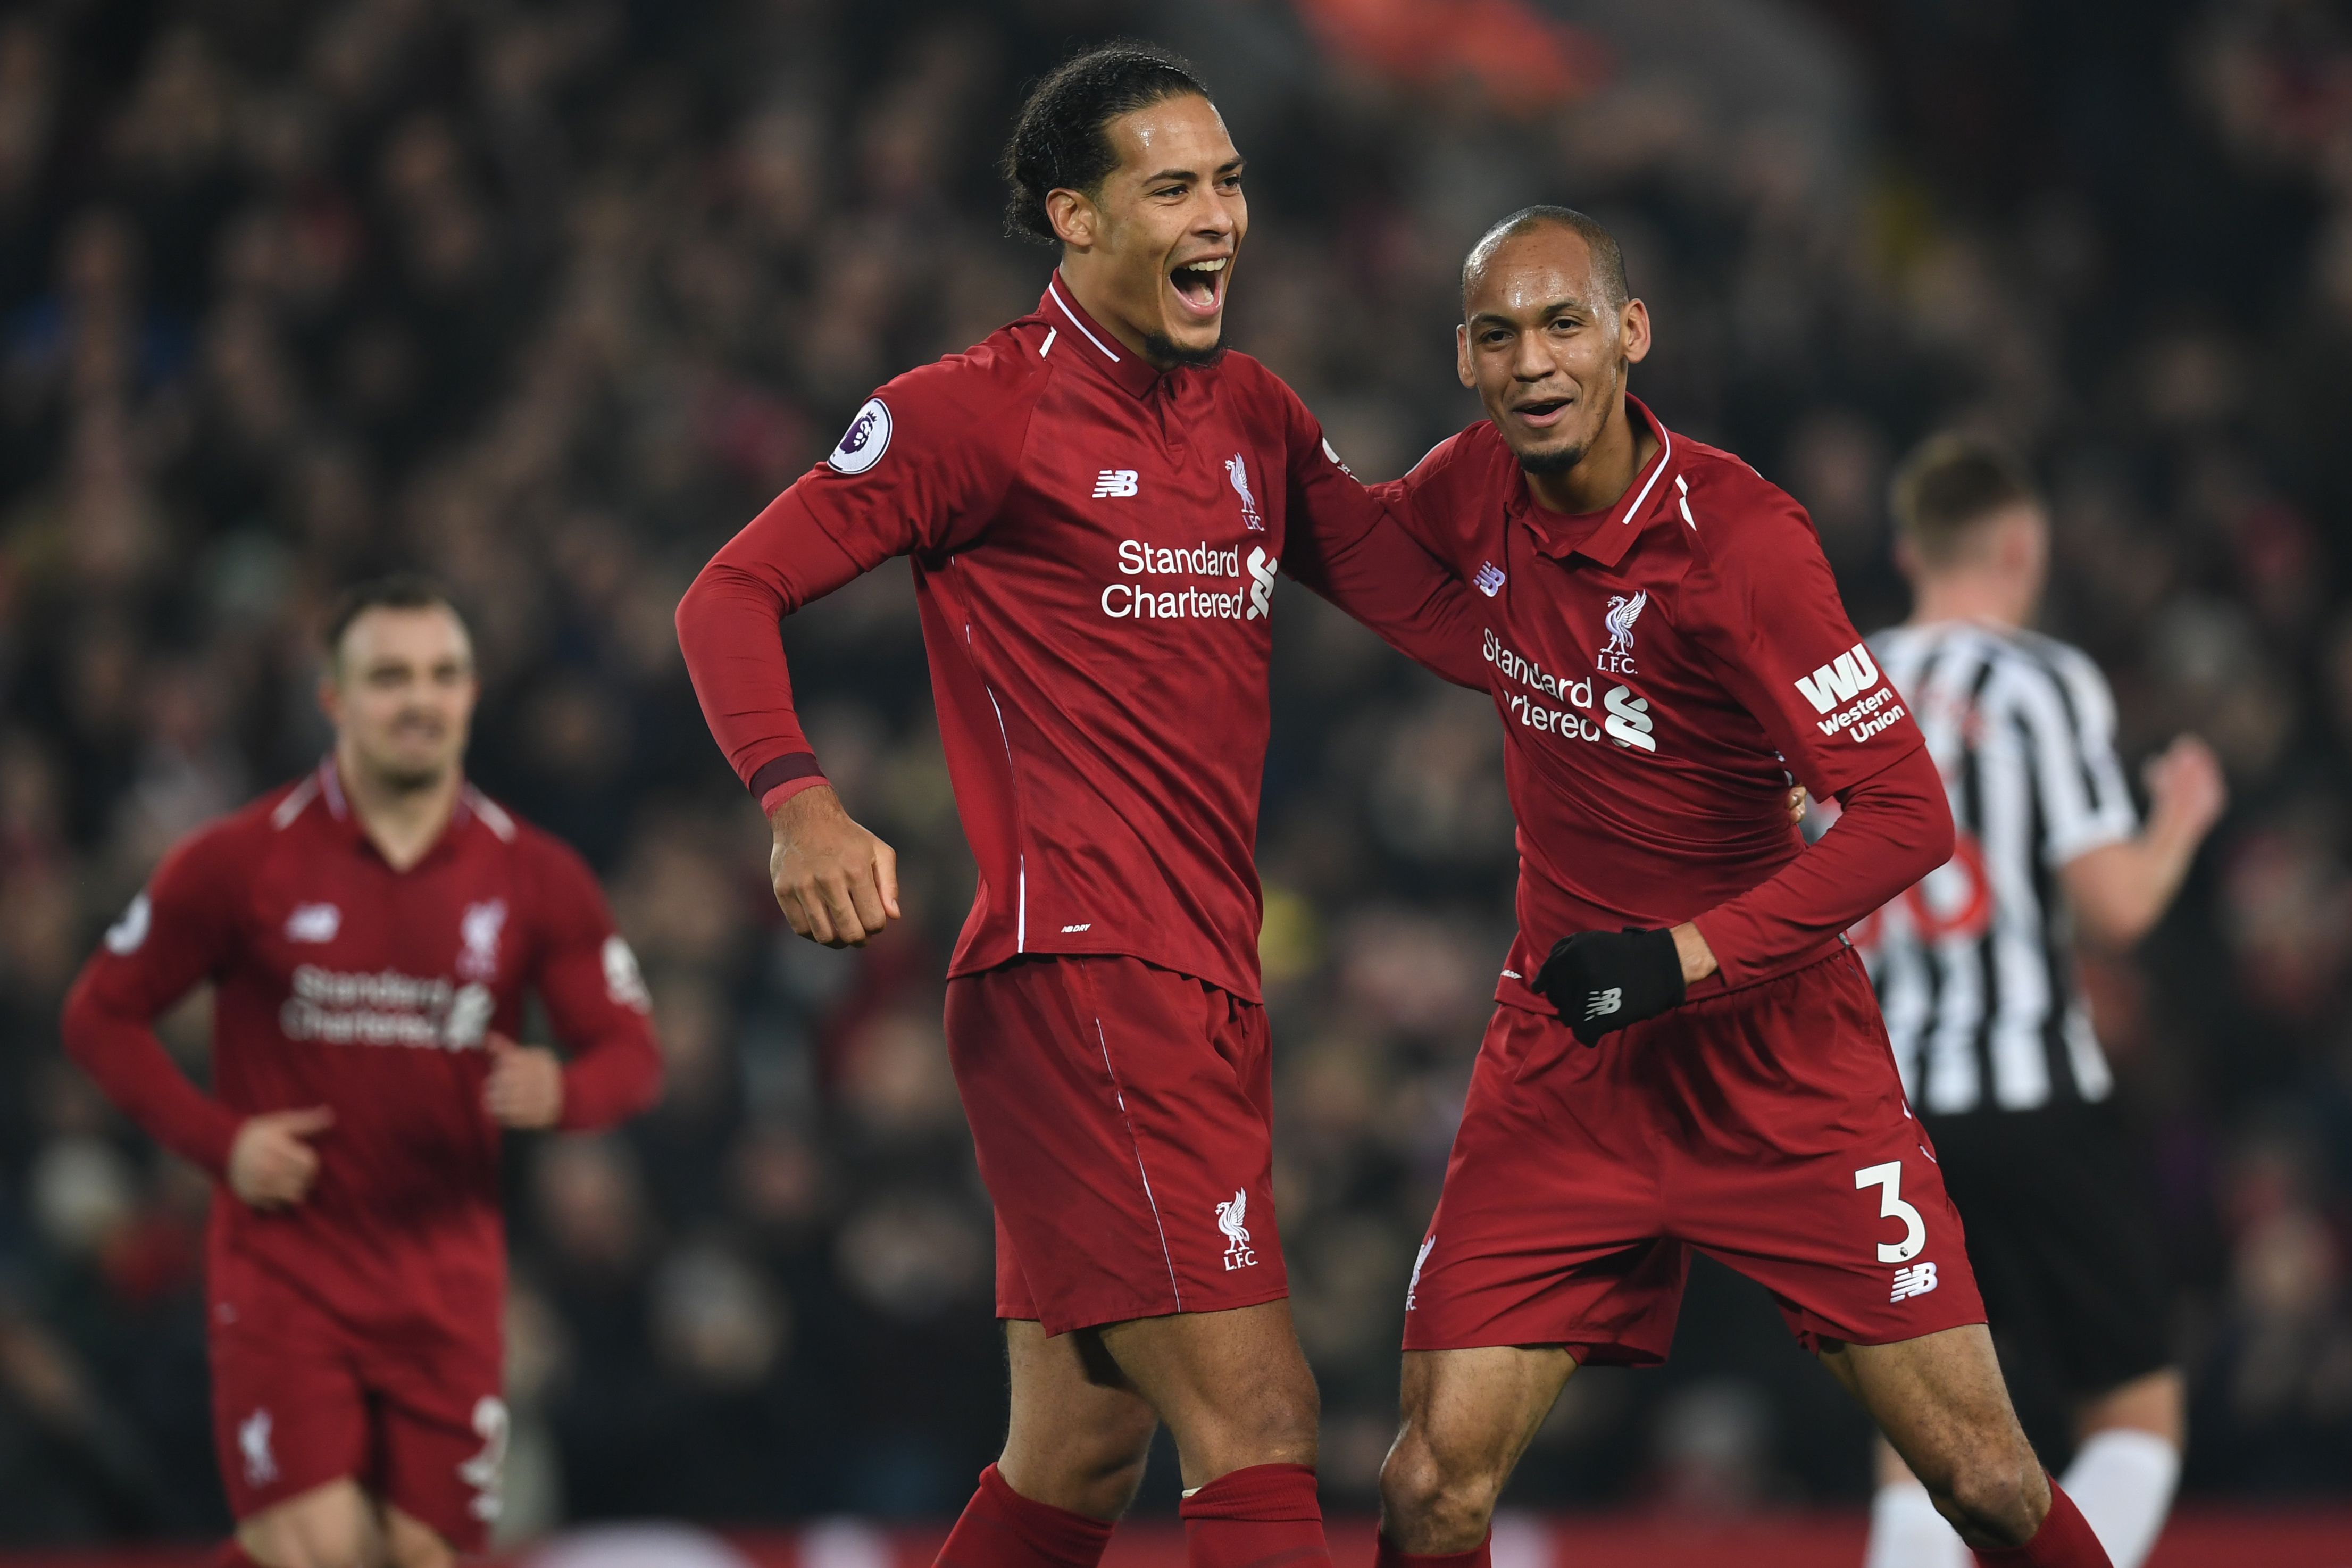 Liverpool's Brazilian midfielder Fabinho (R) celebrates with Liverpool's Dutch defender Virgil van Dijk (C) after scoring their fourth goal during the English Premier League football match between Liverpool and Newcastle United at Anfield in Liverpool, north west England on December 26, 2018. - Liverpool won the game 4-0. (Photo by Paul ELLIS / AFP) / RESTRICTED TO EDITORIAL USE. No use with unauthorized audio, video, data, fixture lists, club/league logos or 'live' services. Online in-match use limited to 120 images. An additional 40 images may be used in extra time. No video emulation. Social media in-match use limited to 120 images. An additional 40 images may be used in extra time. No use in betting publications, games or single club/league/player publications. /         (Photo credit should read PAUL ELLIS/AFP/Getty Images)